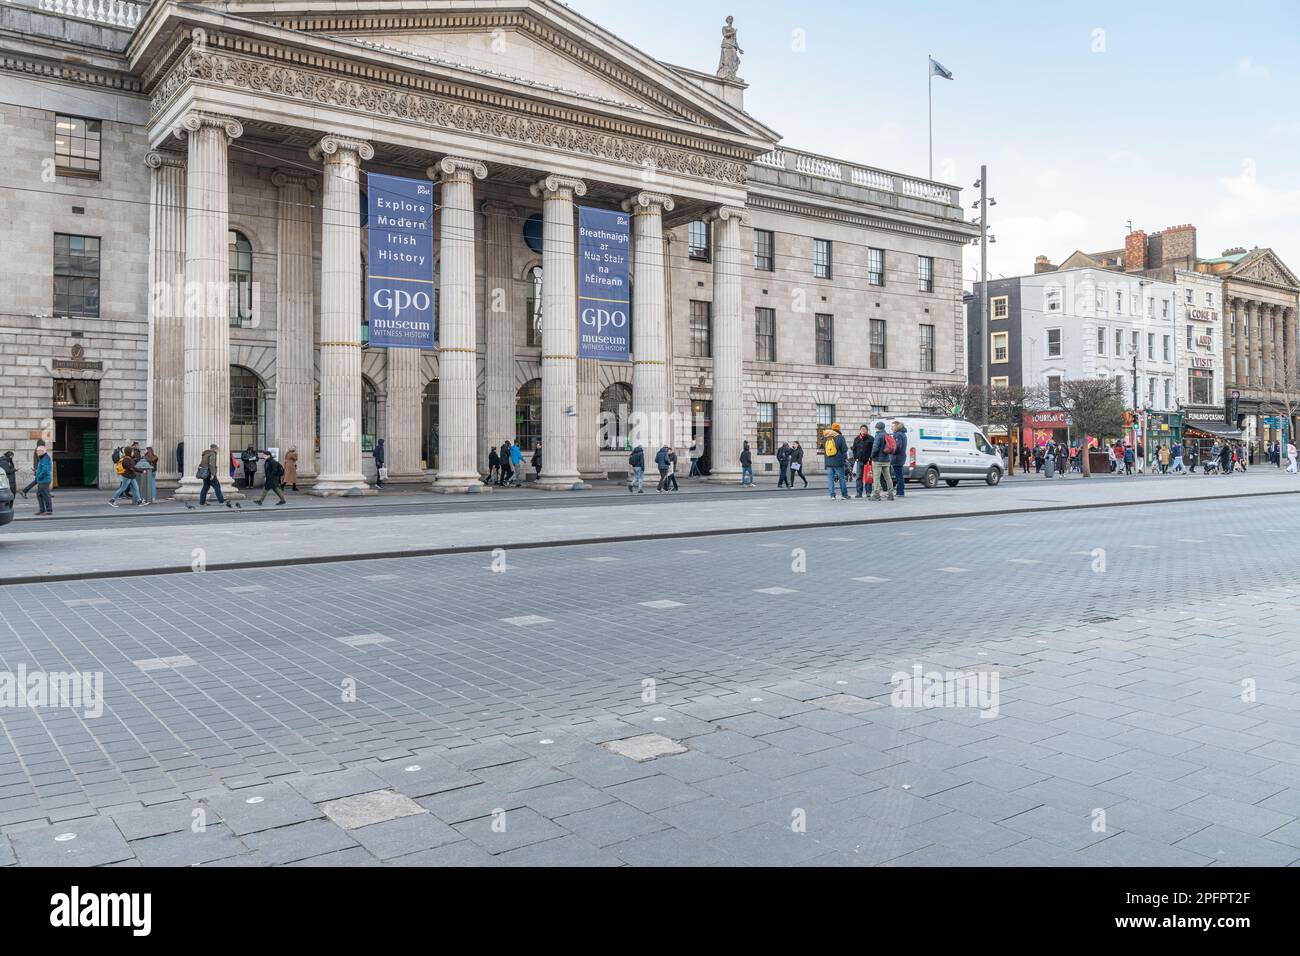 The General Post Office Headquarters in O'Connell Street, Dublin, Ireland Stock Photo